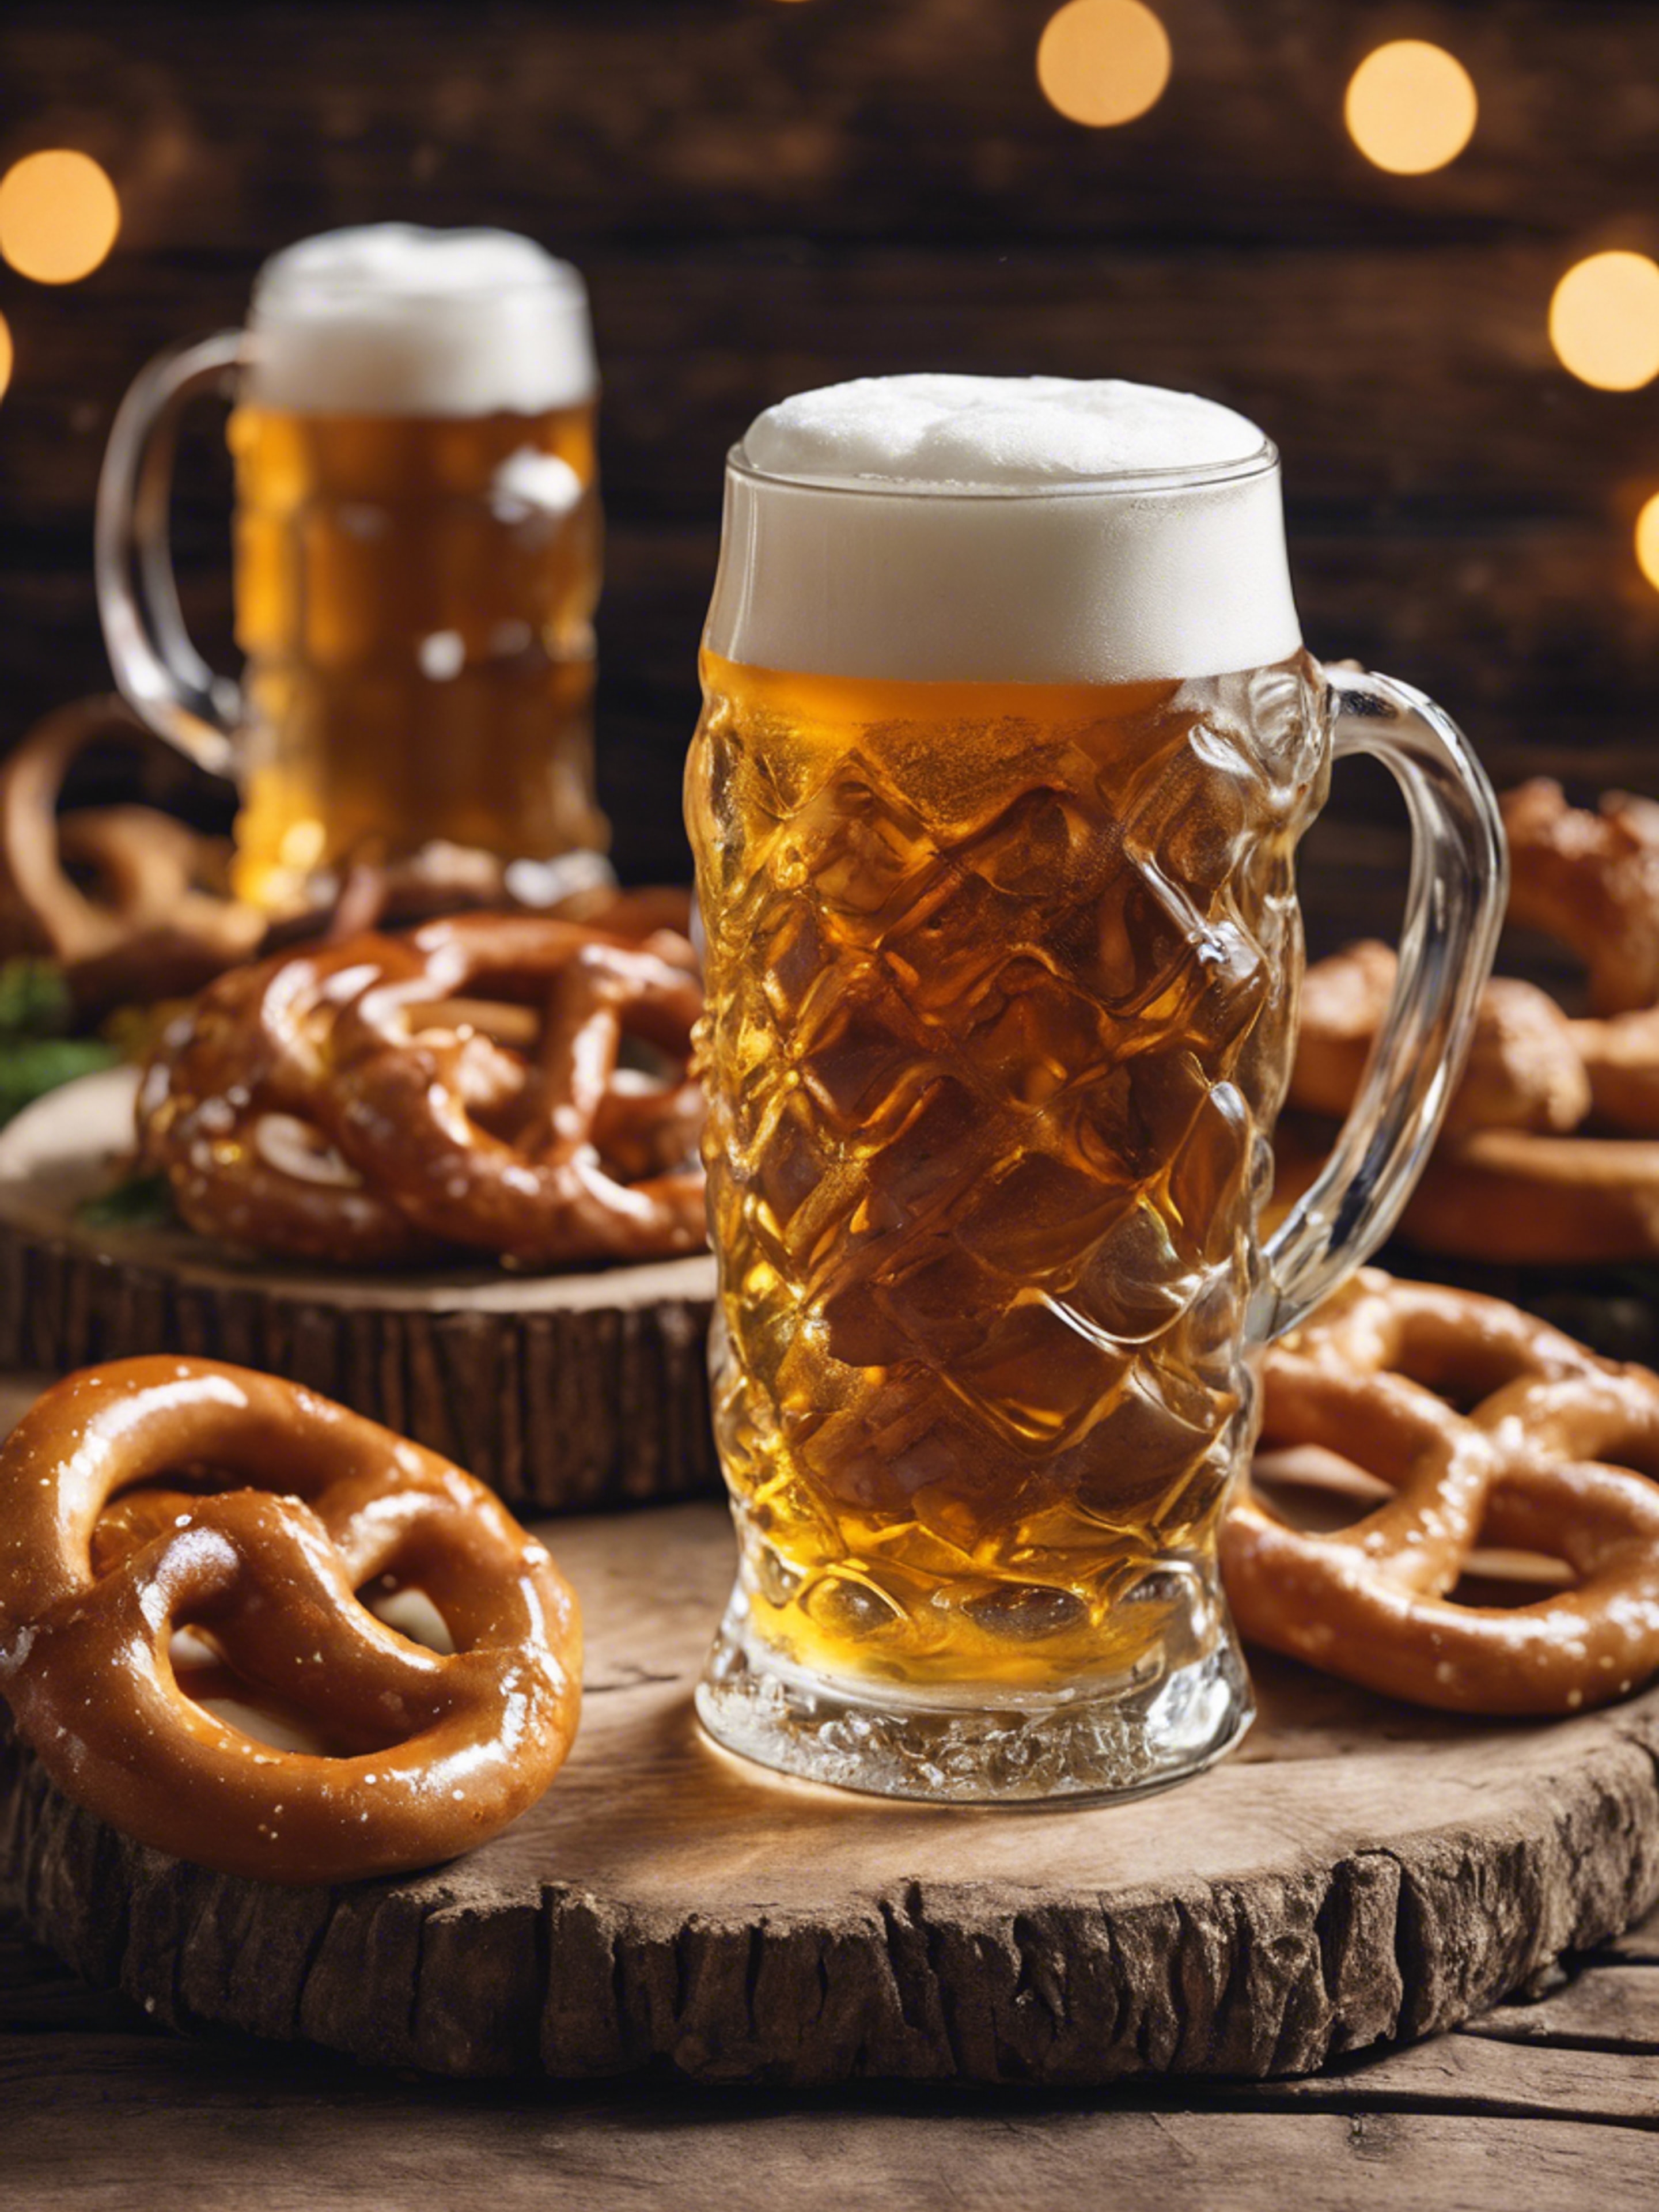 A foamy German beer, pretzels, and other Oktoberfest traditional foods on a rustic wooden table. 벽지[8867ca72213c4237bd6d]